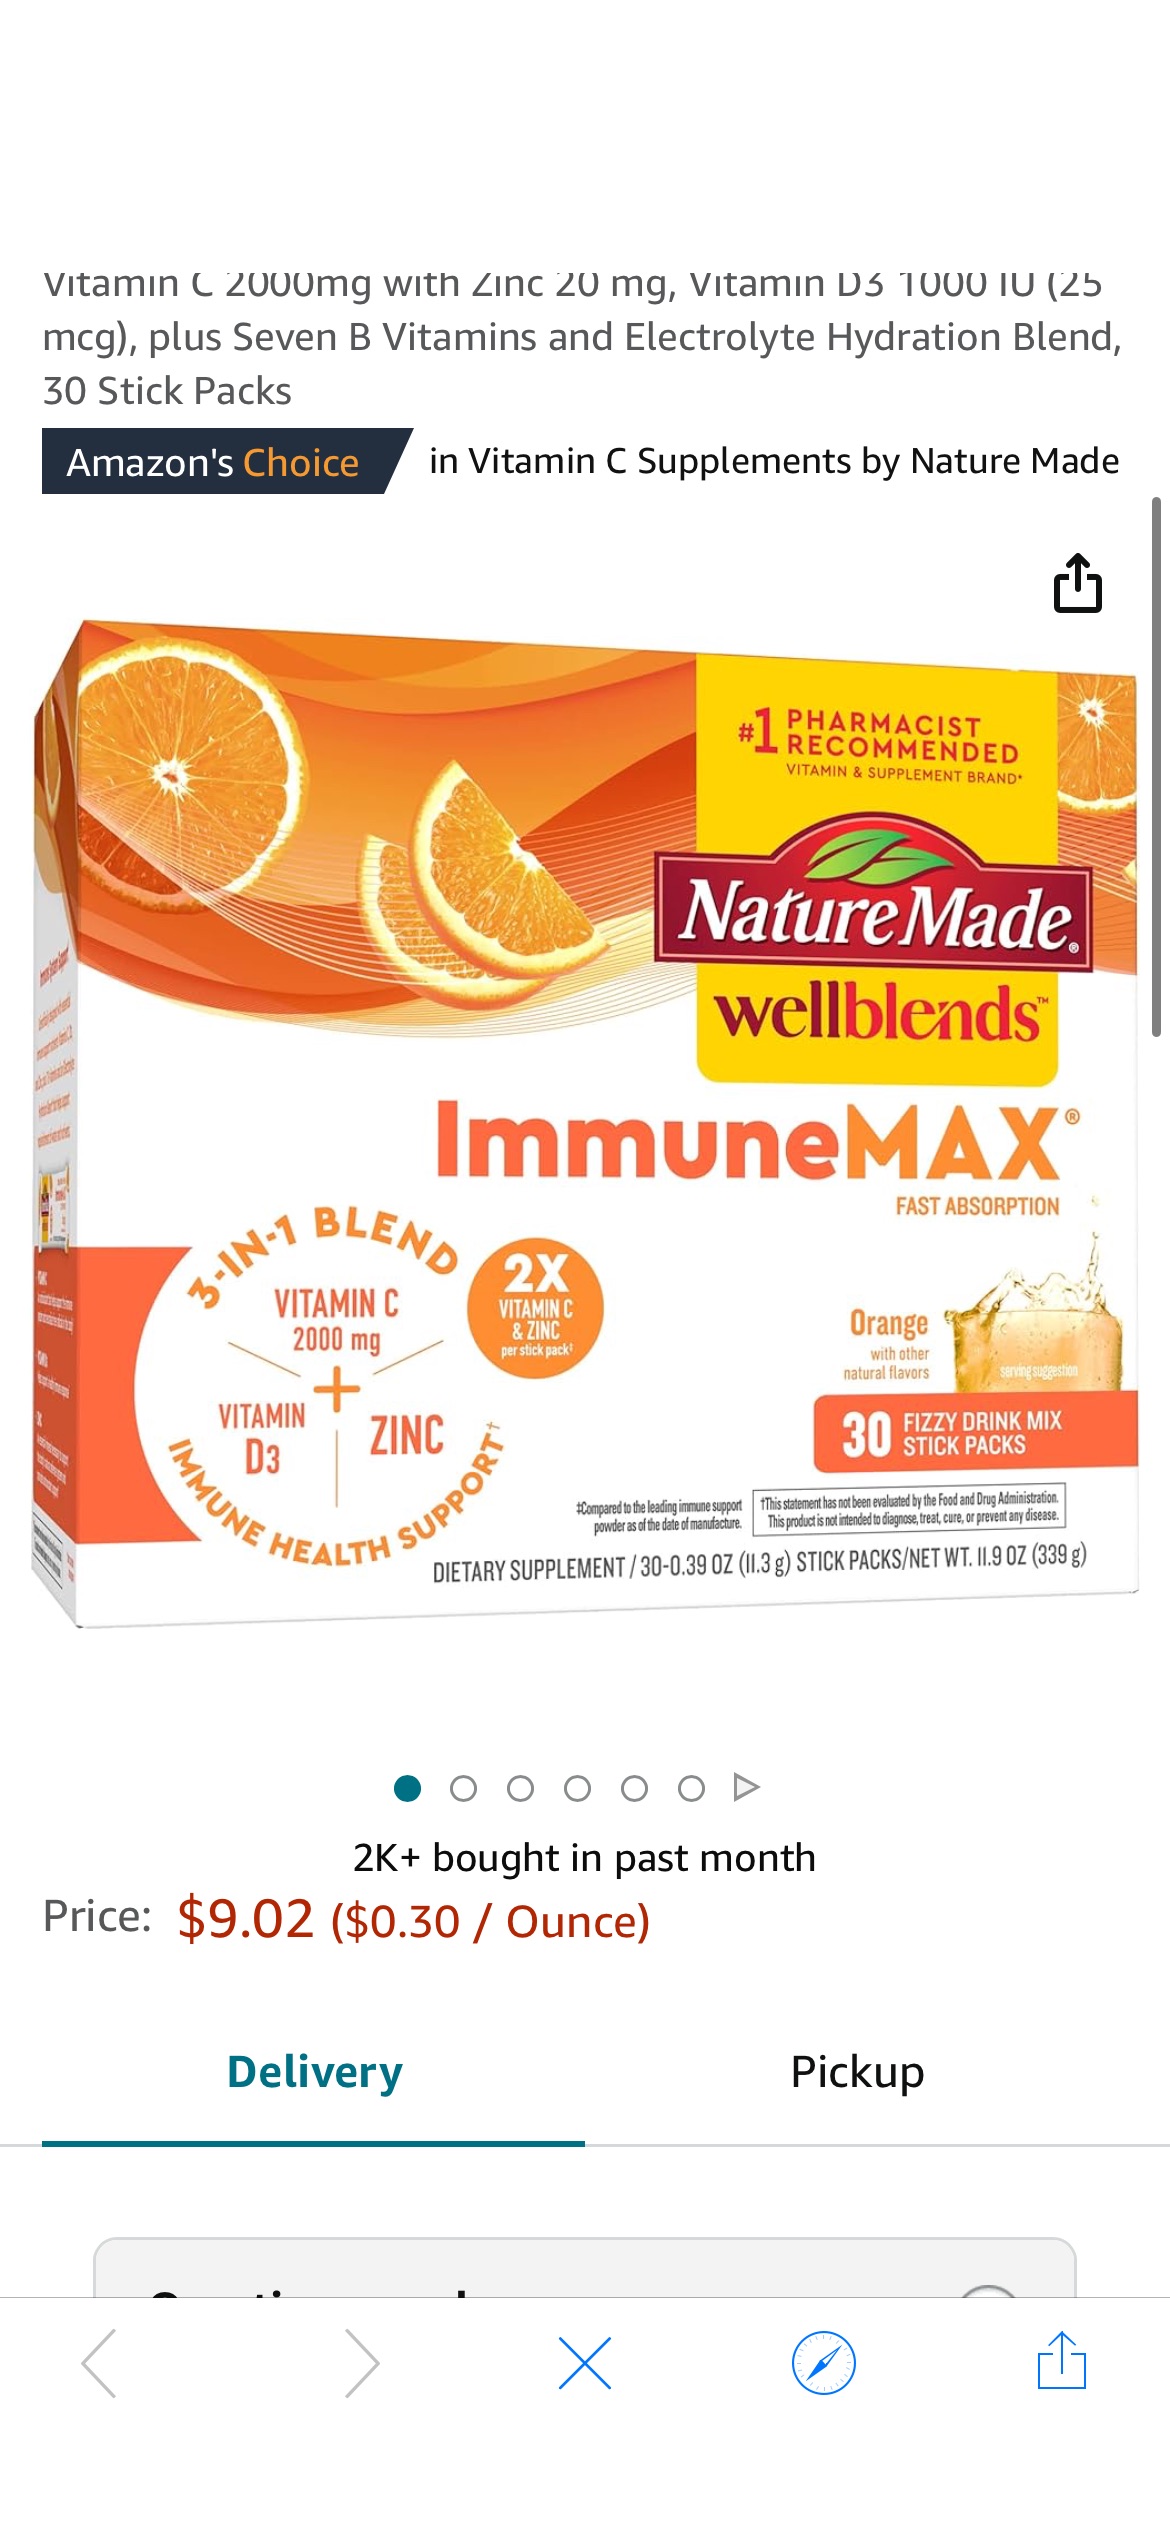 Amazon.com: Nature Made Wellblends ImmuneMAX Fizzy Drink Mix, Vitamin C 2000mg with Zinc 20 mg, Vitamin D3 1000 IU (25 mcg), plus Seven B Vitamins and Electrolyte Hydration Blend, 30 Stick Packs : Hea